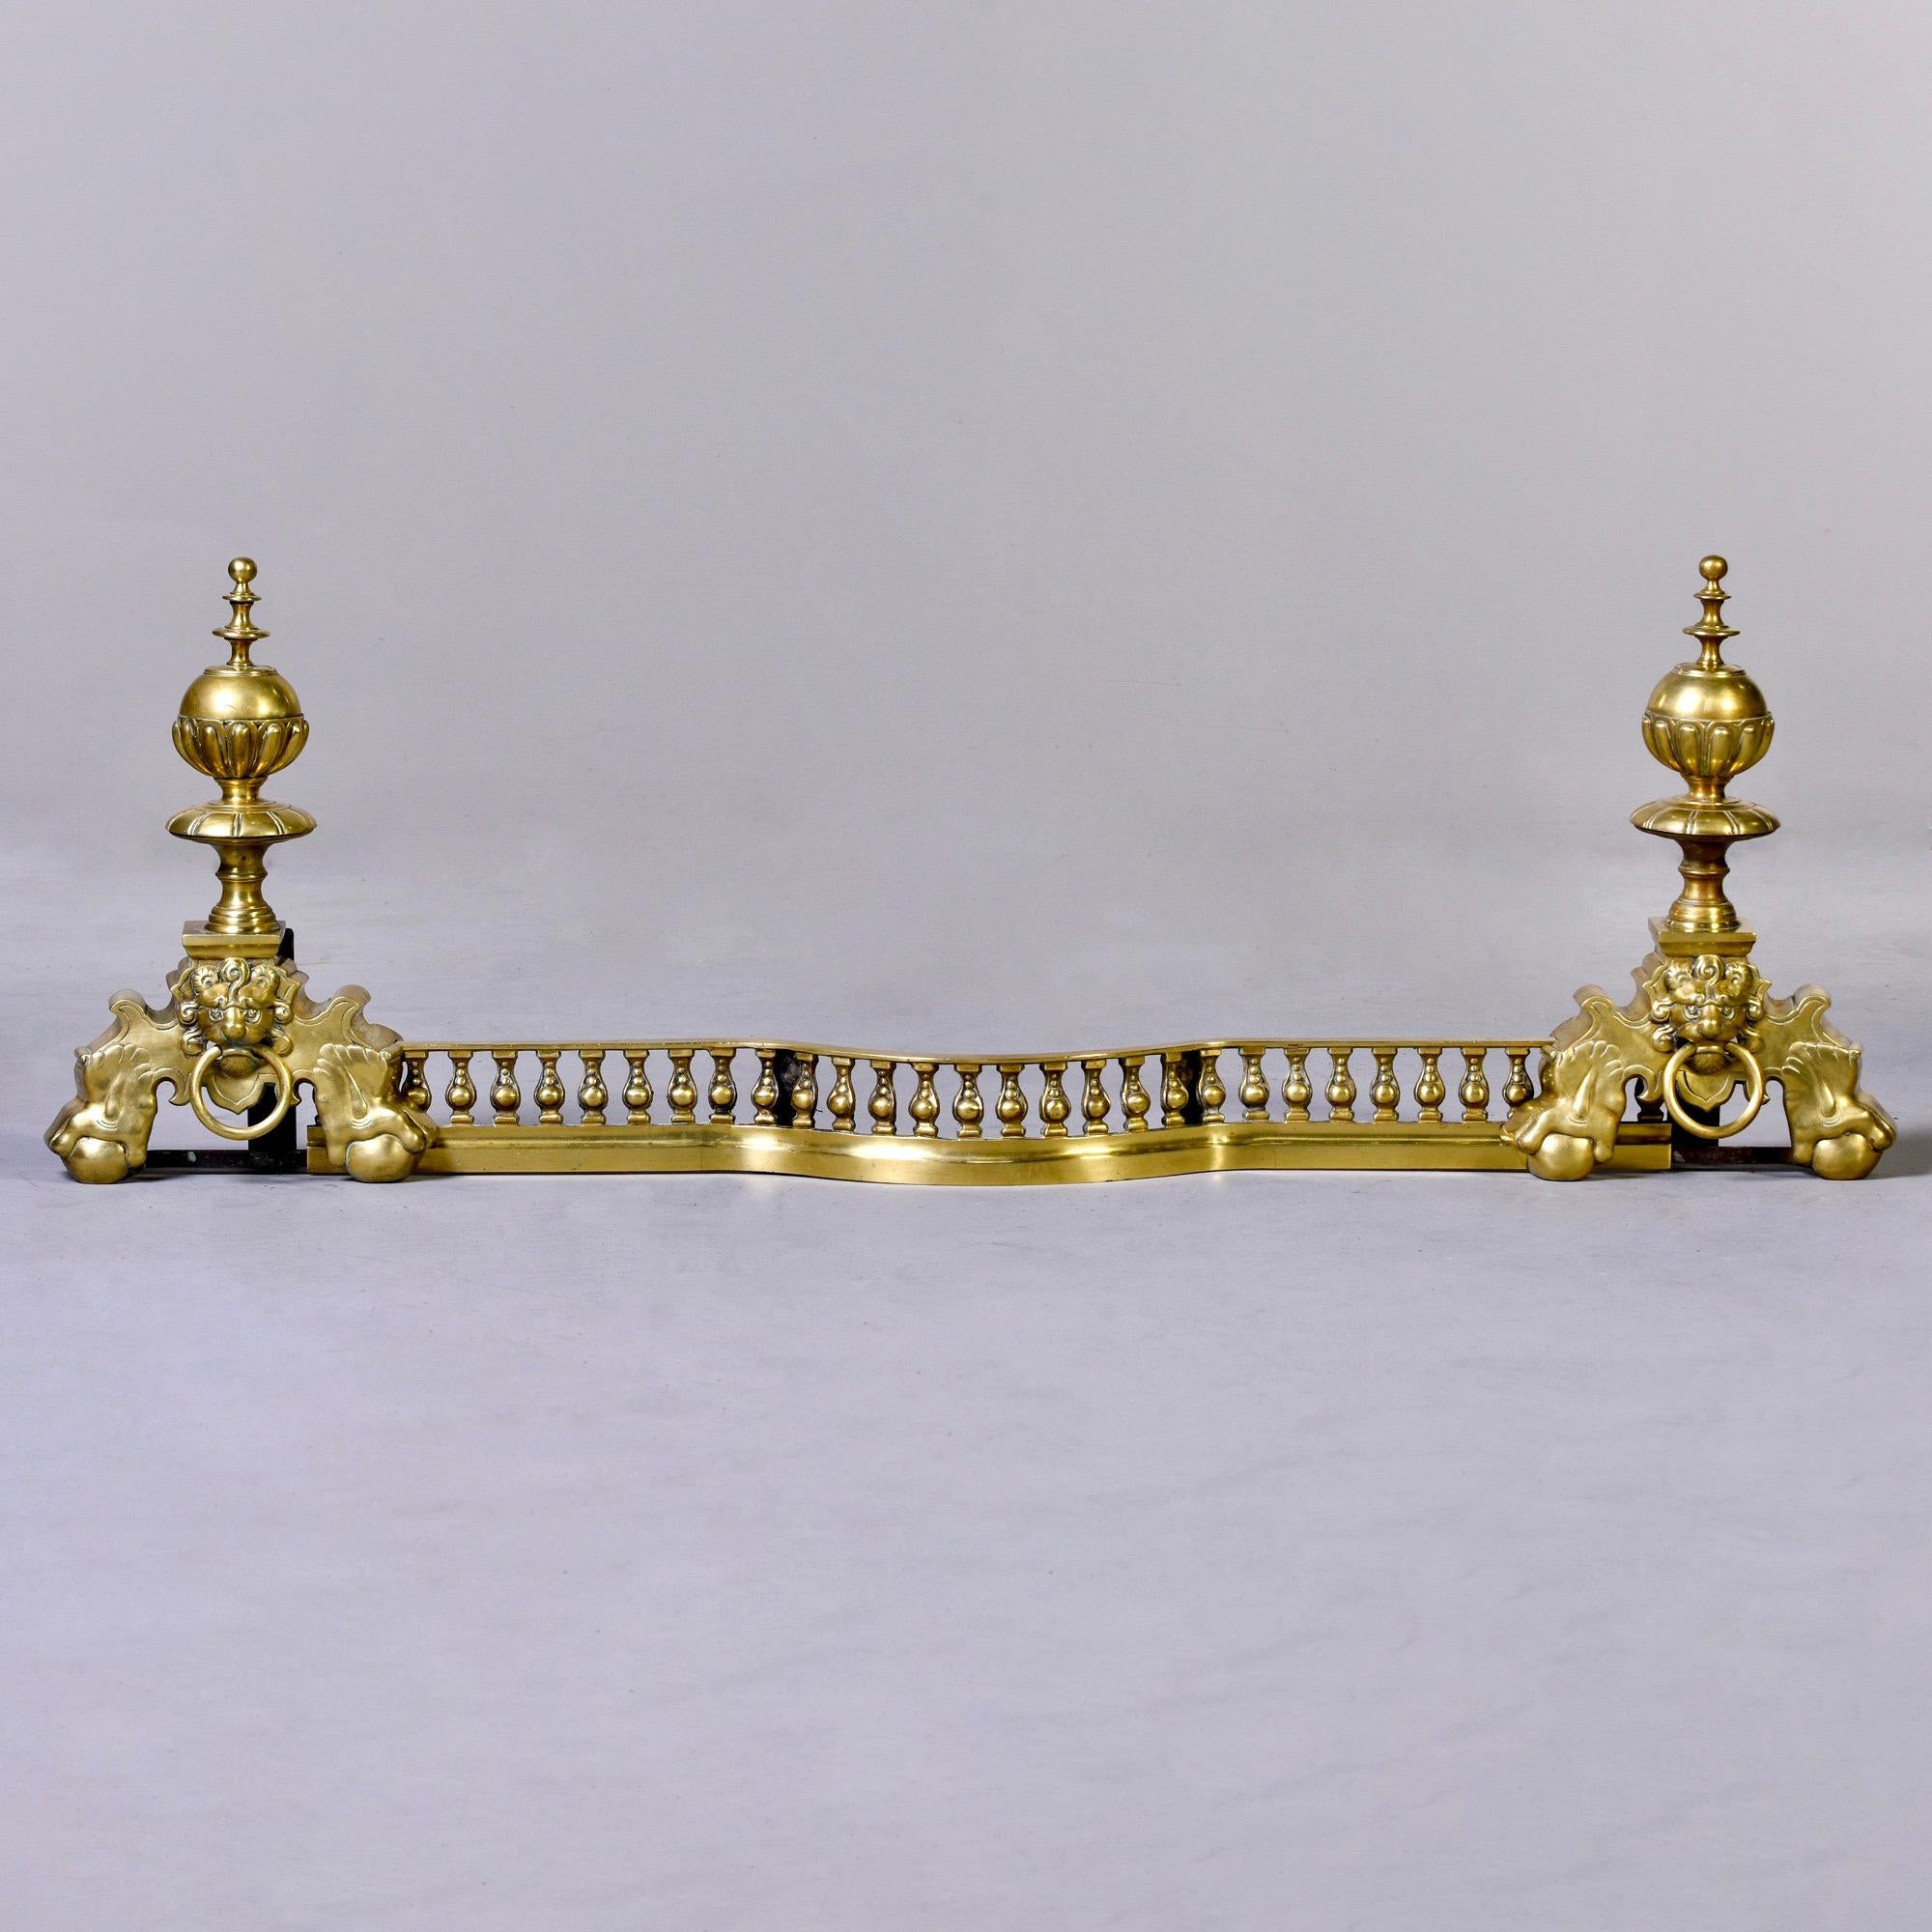 Solid brass adjustable fireplace fender with lion heads, ball and claw feet and tall finials, circa 1930s. Width of fender can be adjusted from 42-52” by sliding lion ends inward or outward. Unknown maker. Found in US.